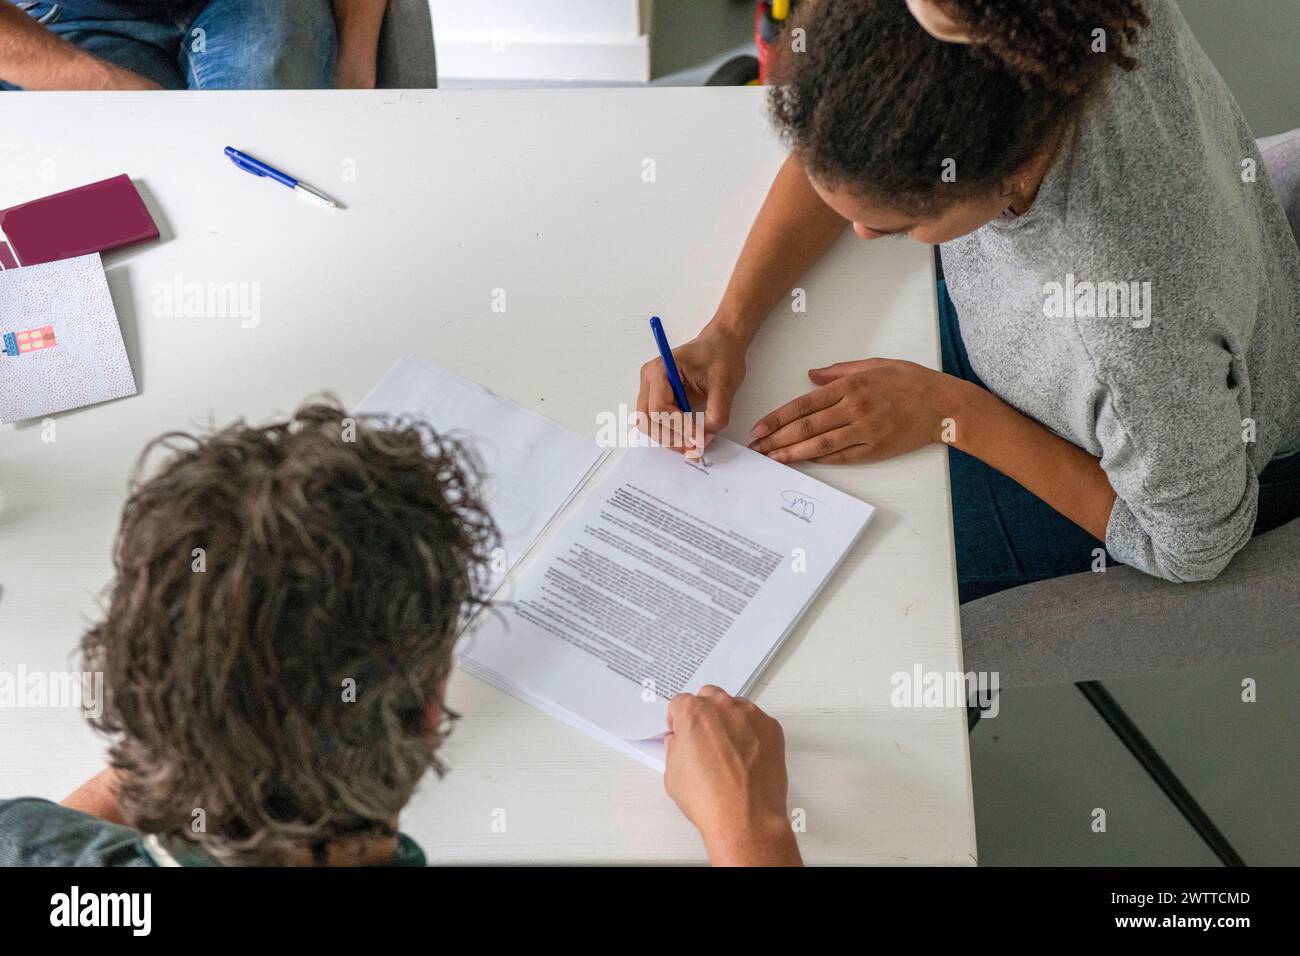 Two people collaborating on a document at a white table. Stock Photo